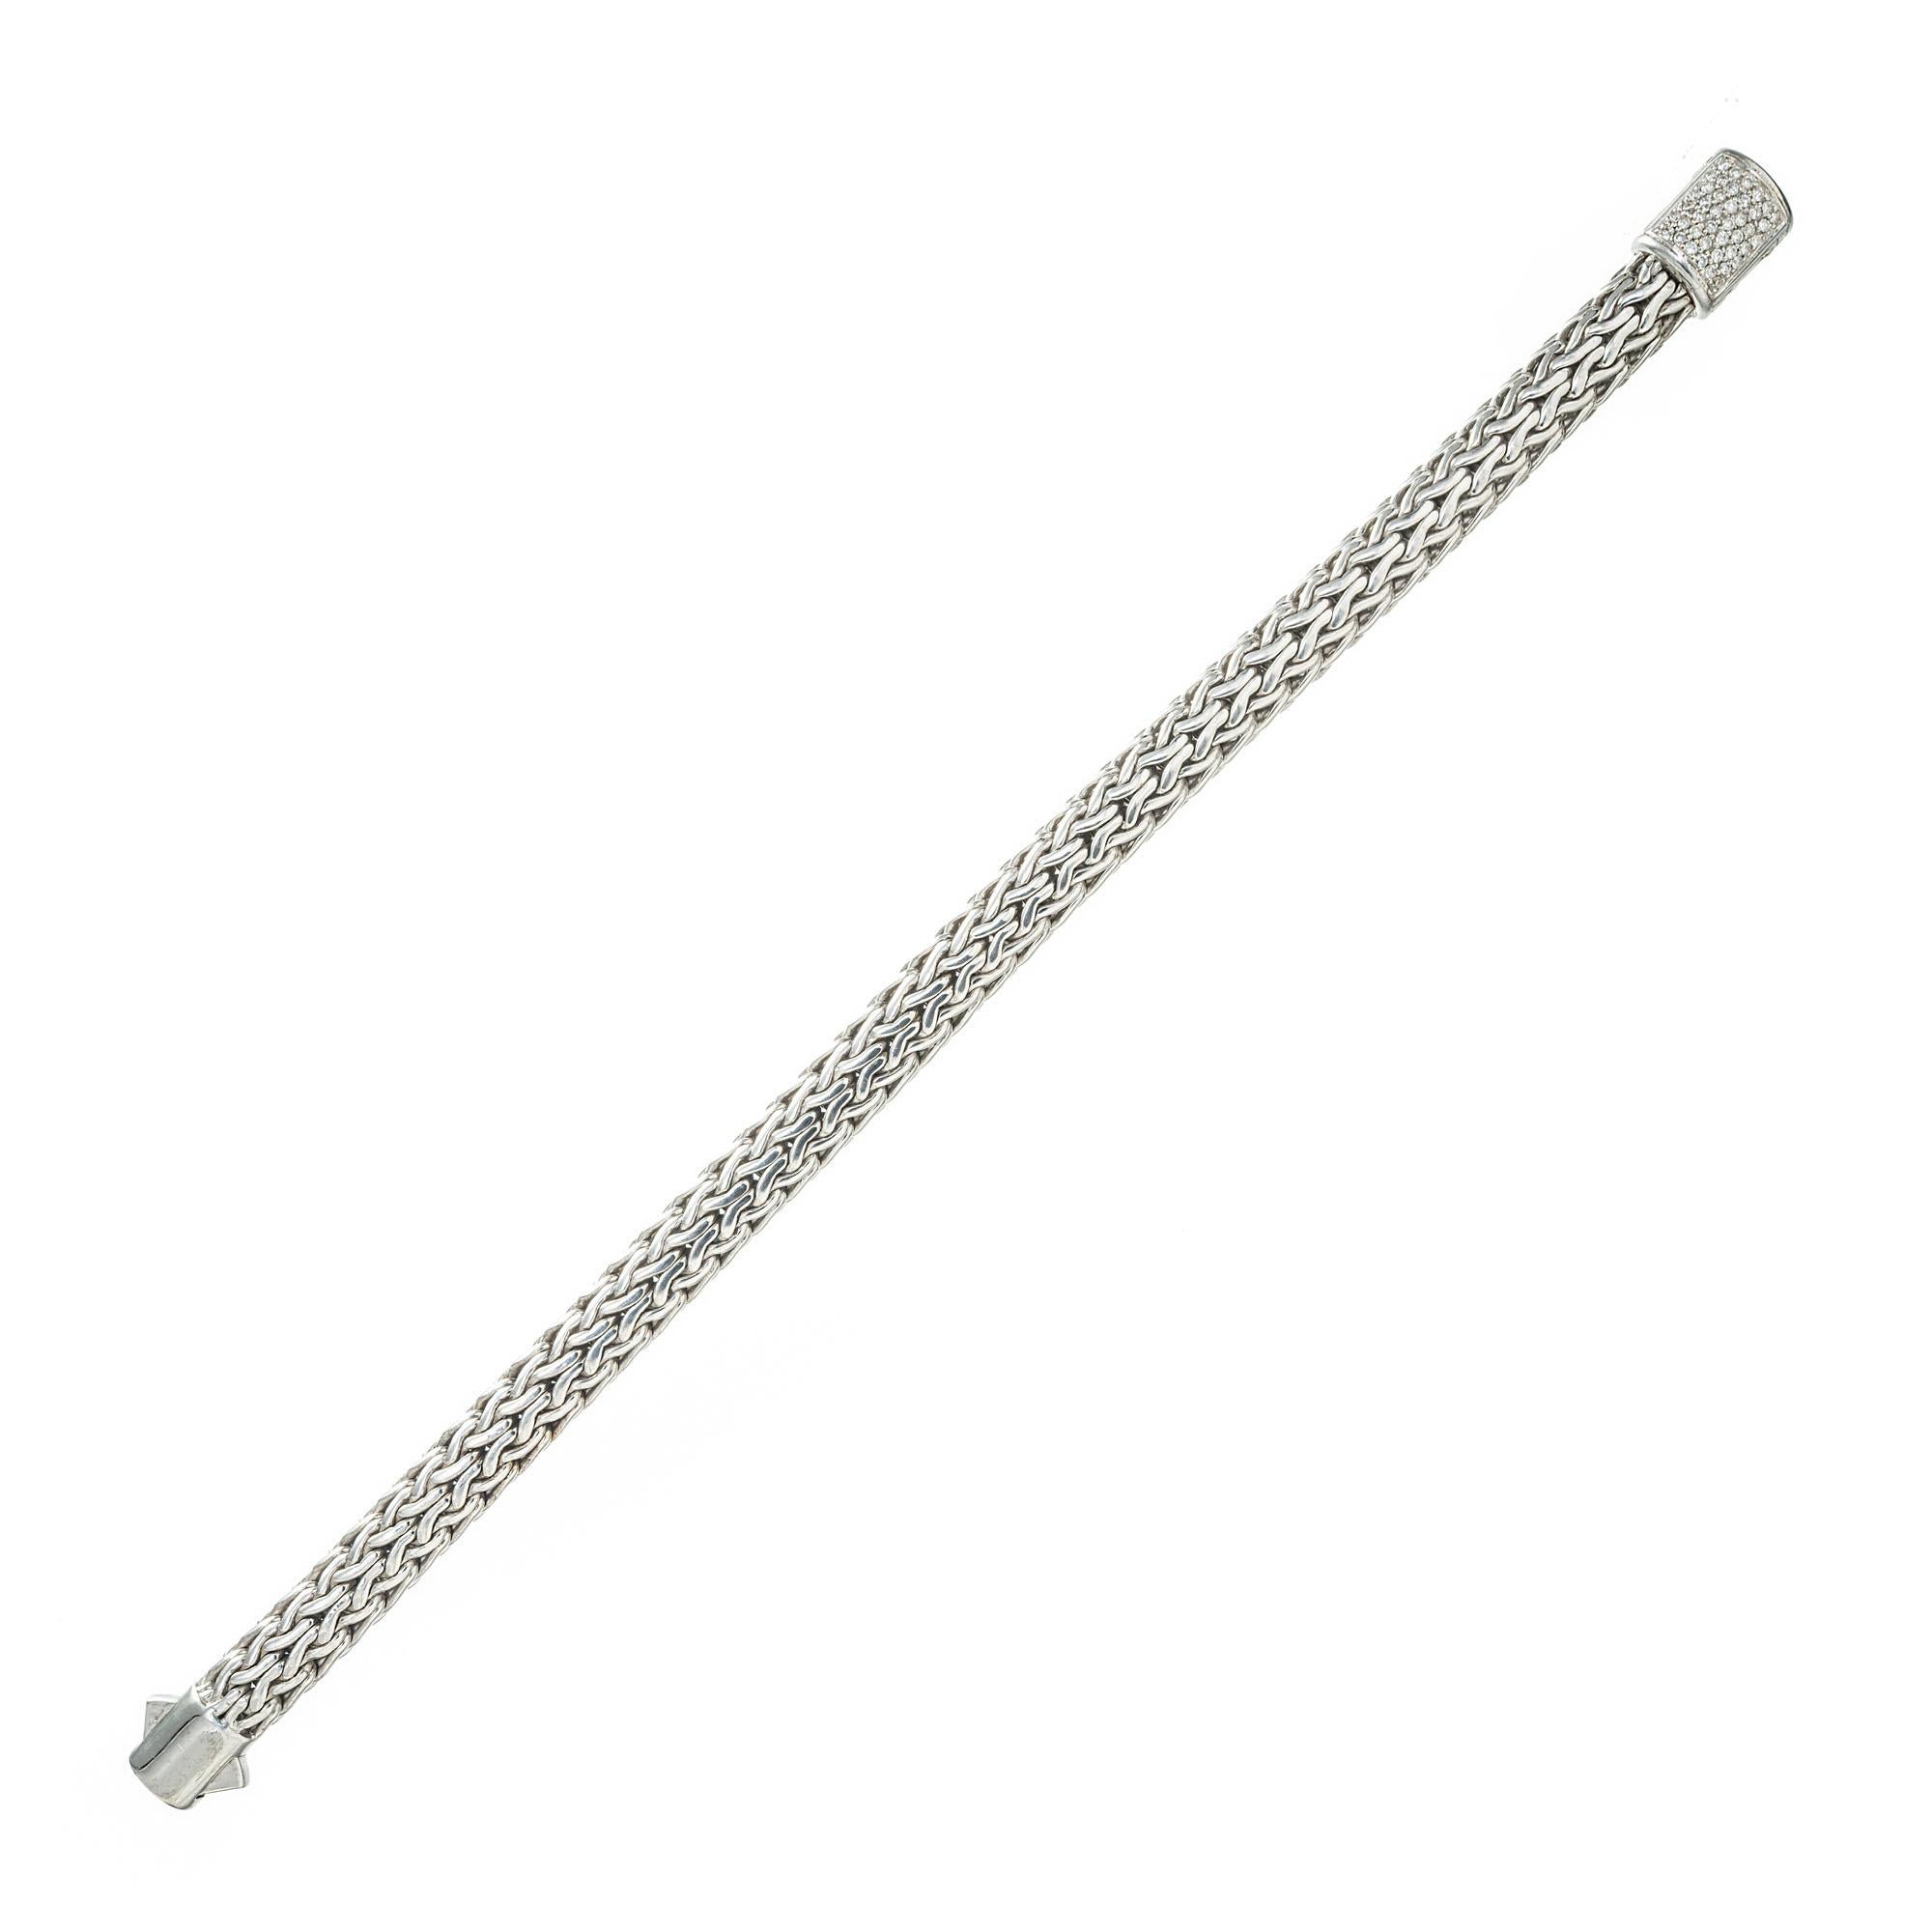 John Hardy round wheat sterling silver bracelet with a diamond pave clasp. 7.5 inches in length. 

42 round brilliant cut diamonds, G SI approx. .24cts
Sterling Silver 
18k White Gold 
Stamped: M
Hallmark: In 18k JH
40.4 grams
Bracelet: 7.5